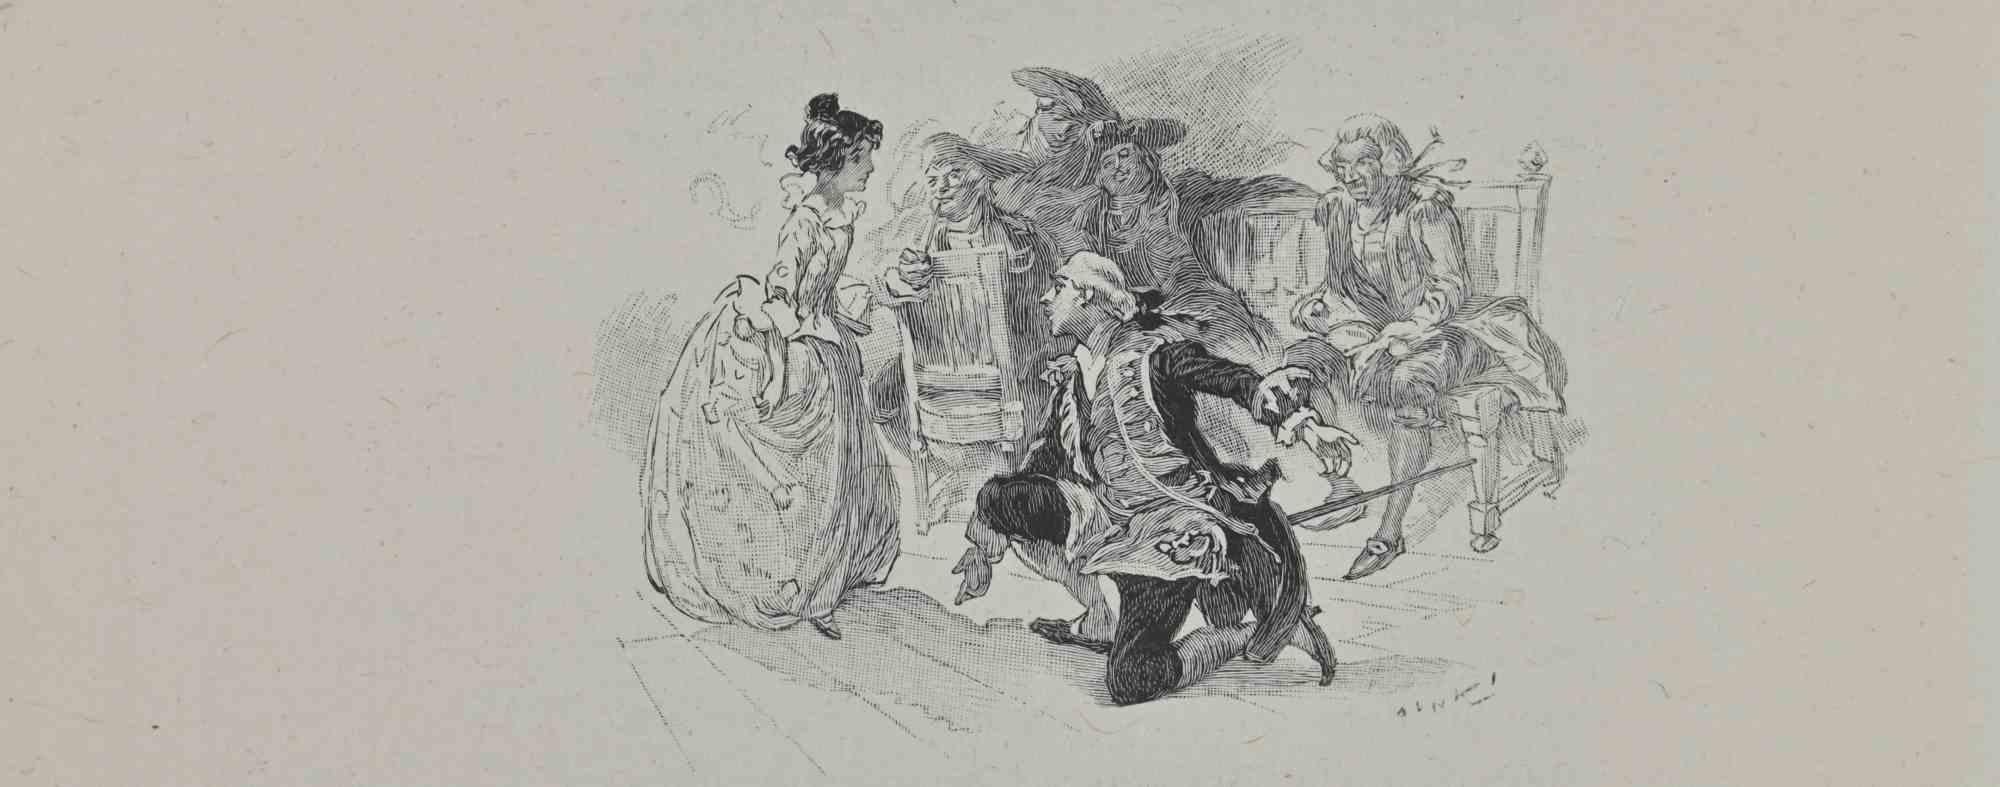 Petits Contes à ma Sœur is a lithograph on paper realized by Hégésippe Moreau,  dated 1838 s.

The artwork  is in good condition.

Hégésippe Moreau (1810-1838) was a French lyric poet. The romantic myth was solidified by the publication of his